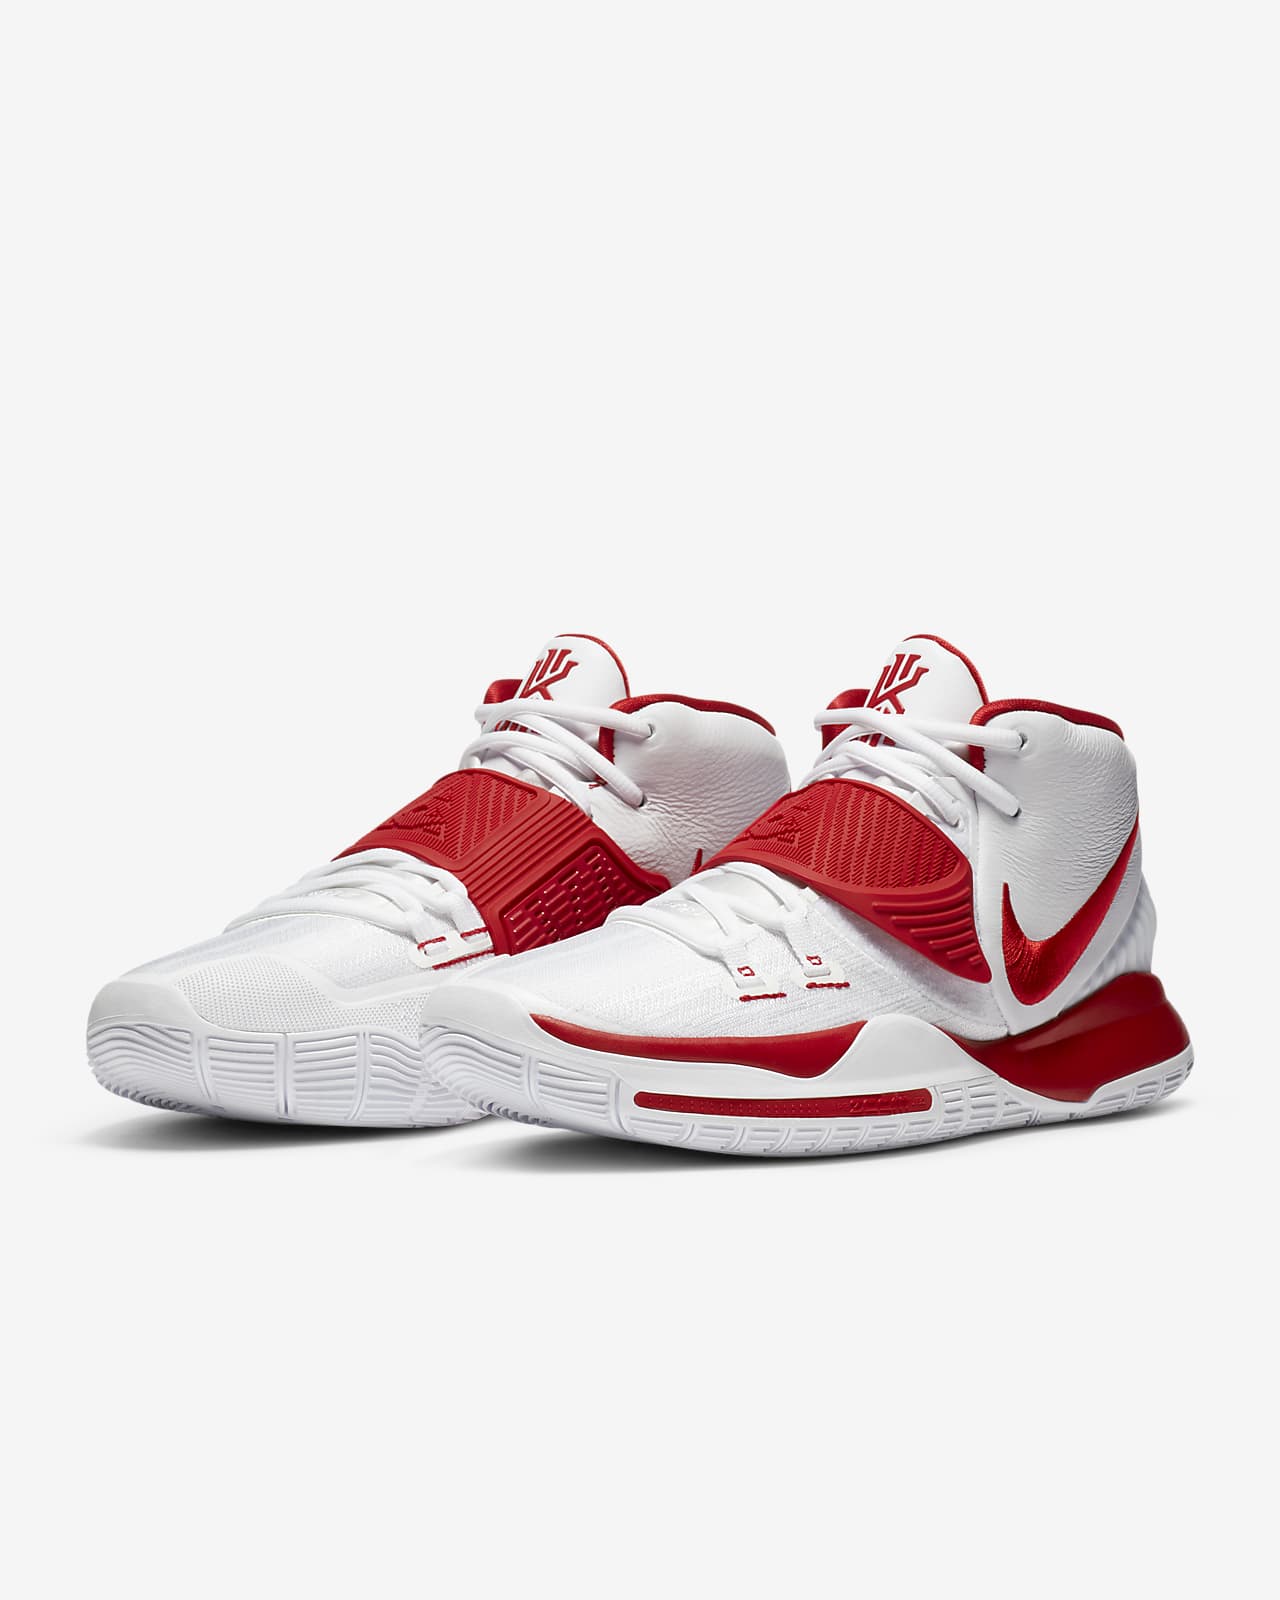 kyrie team shoes